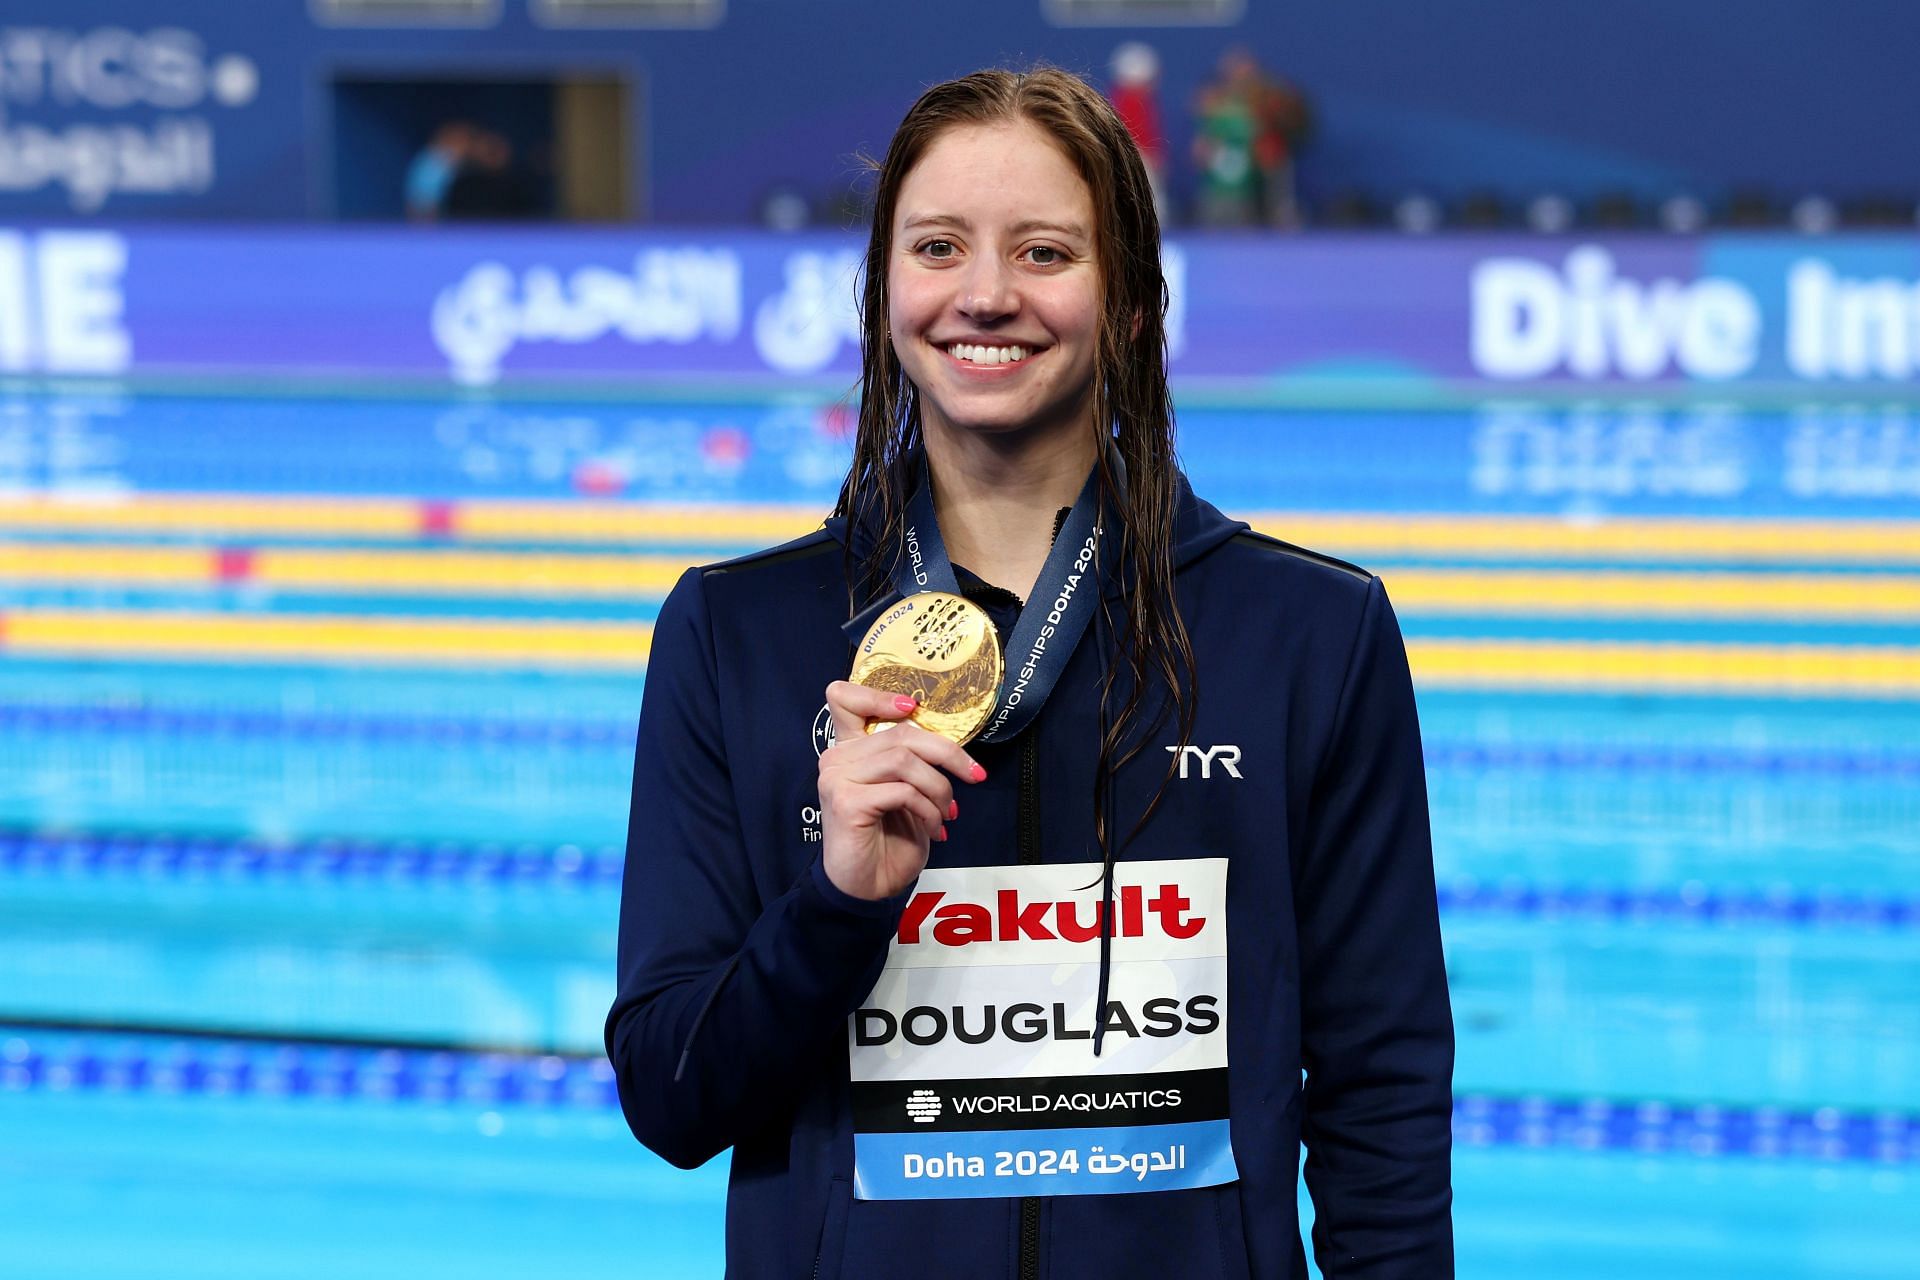 Kate Douglass poses with her medal for the Women&#039;s 200m Individual Medley Final at the 2024 World Aquatics Championships in Doha, Qatar.